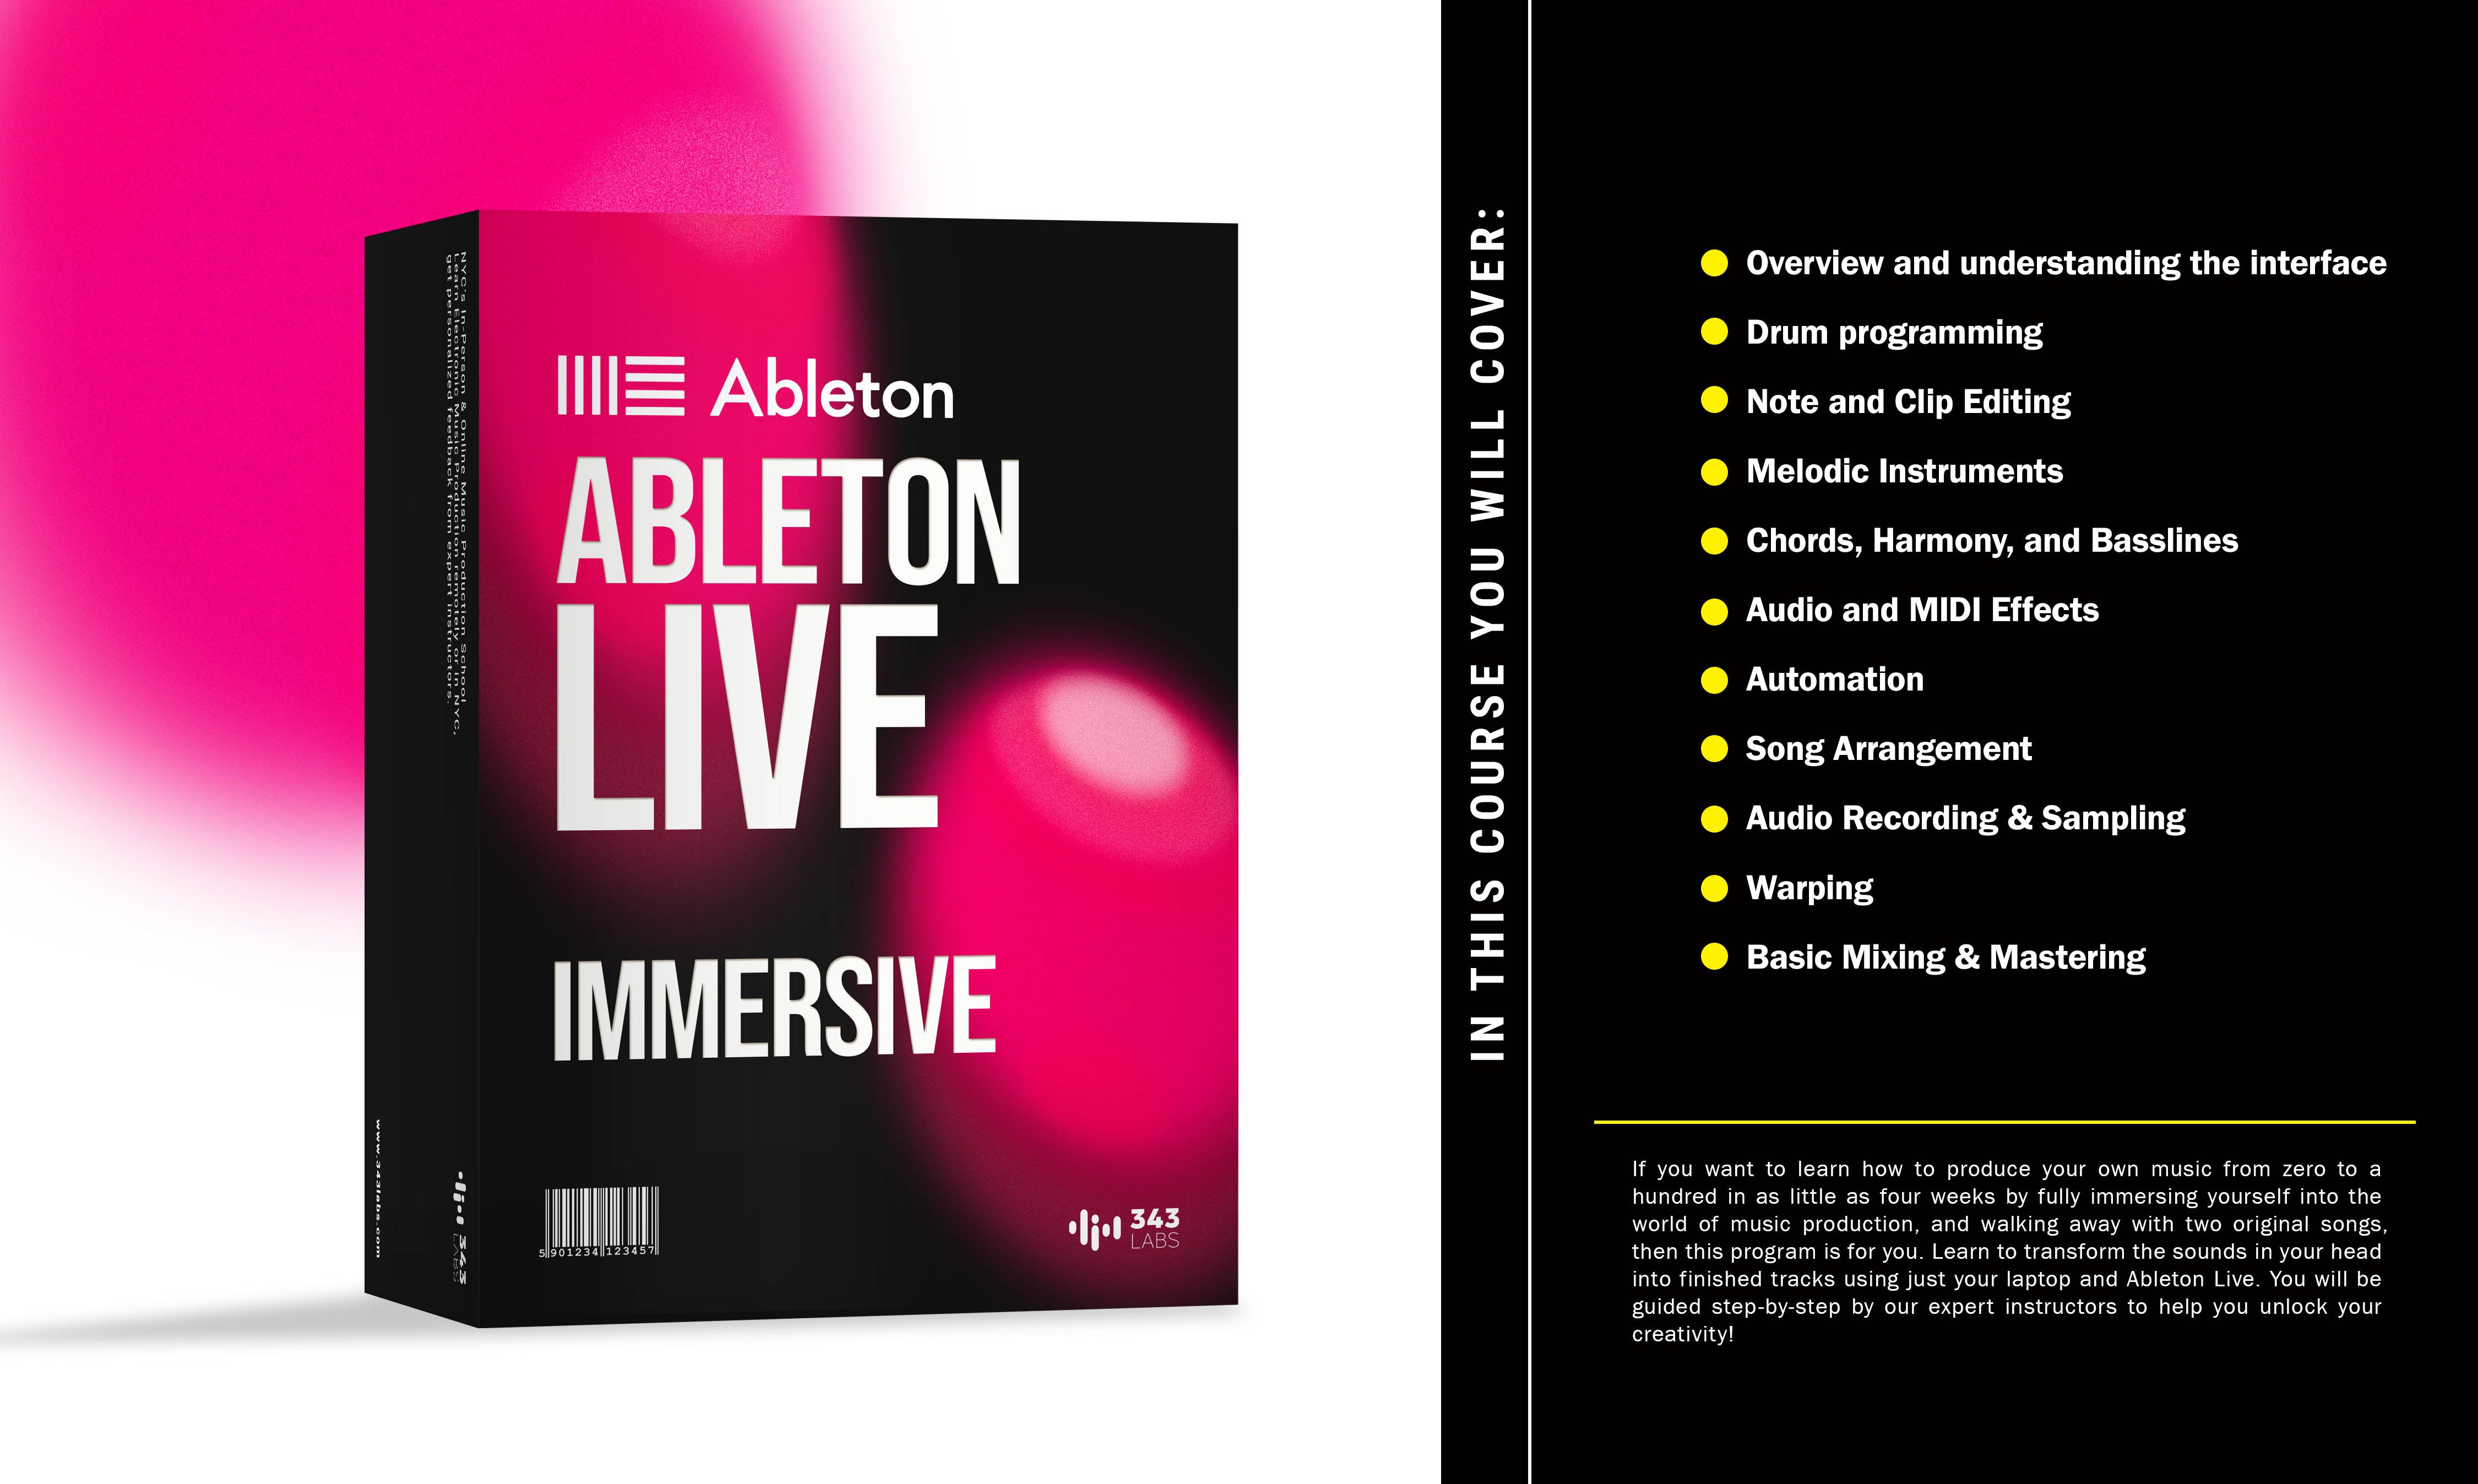 Ableton Immersive [NYC]